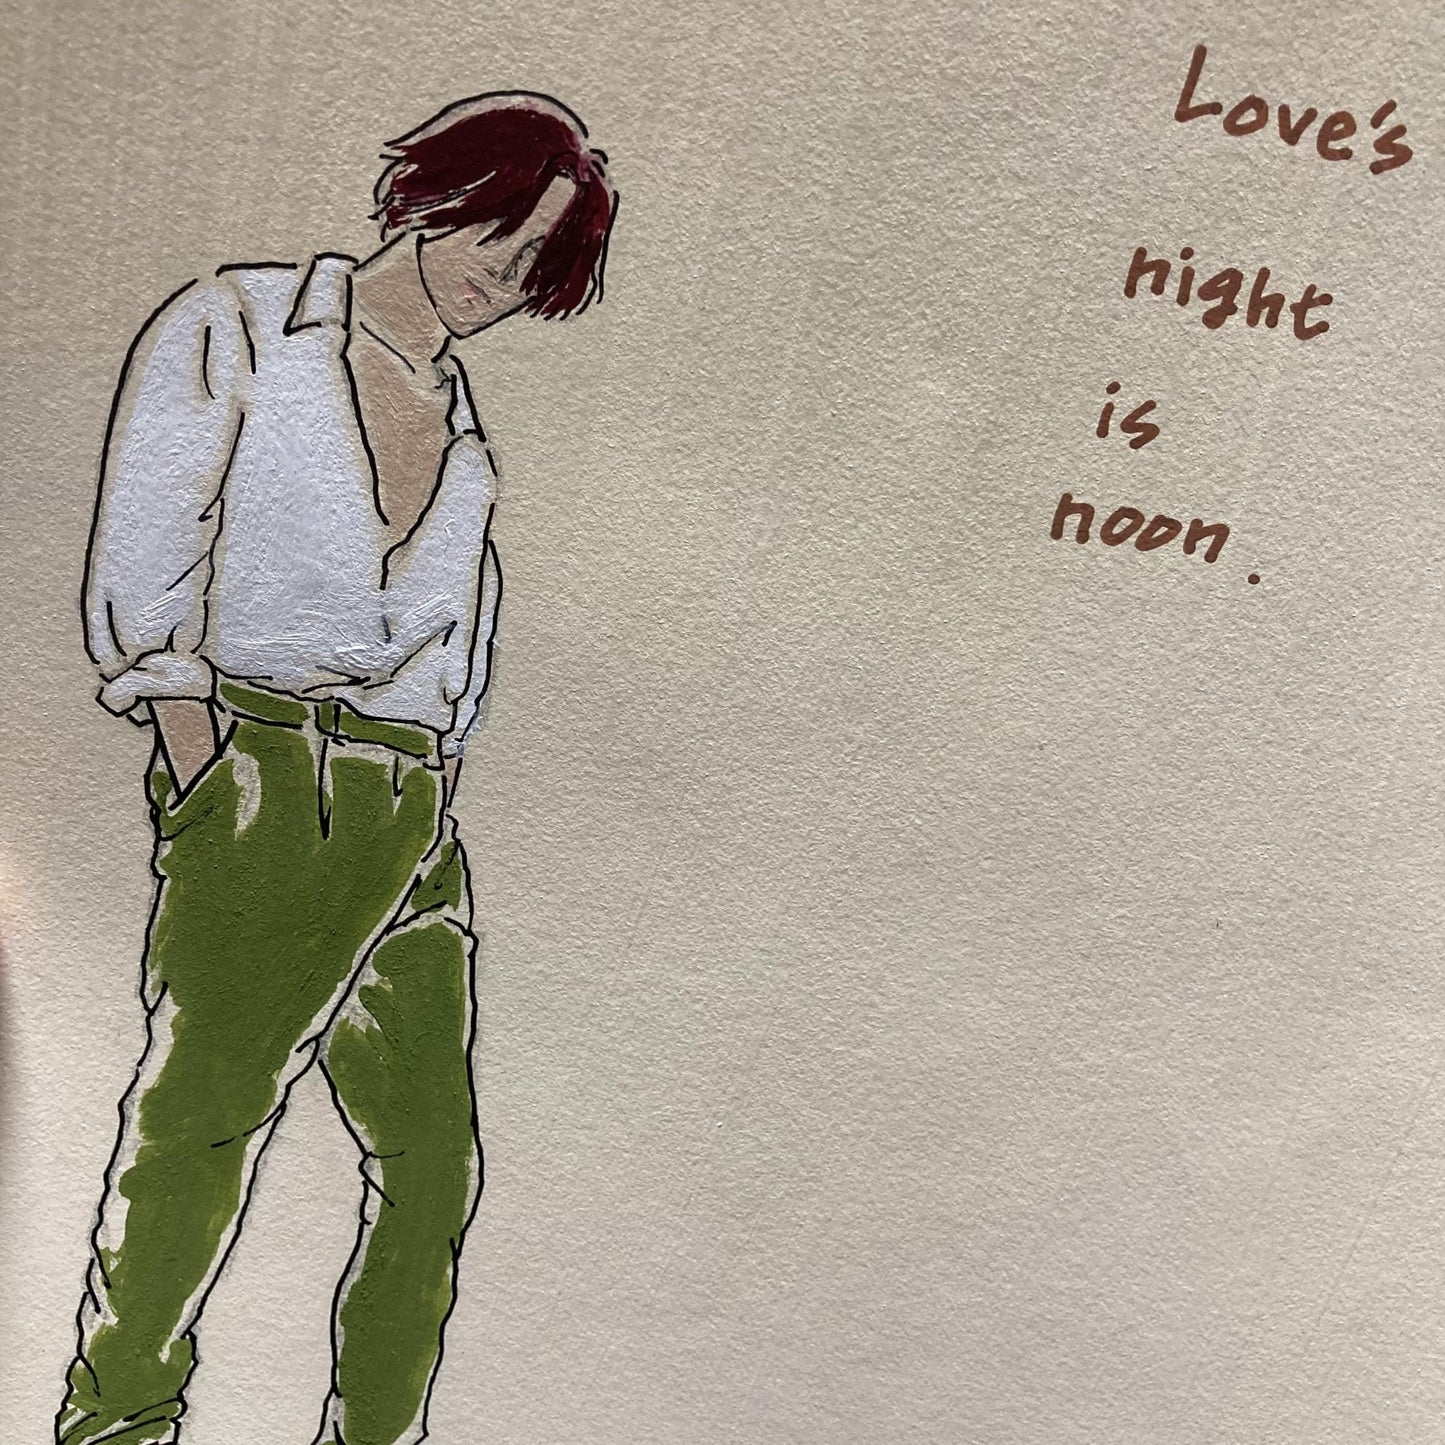 Love's night is noon. - FROM ARTIST